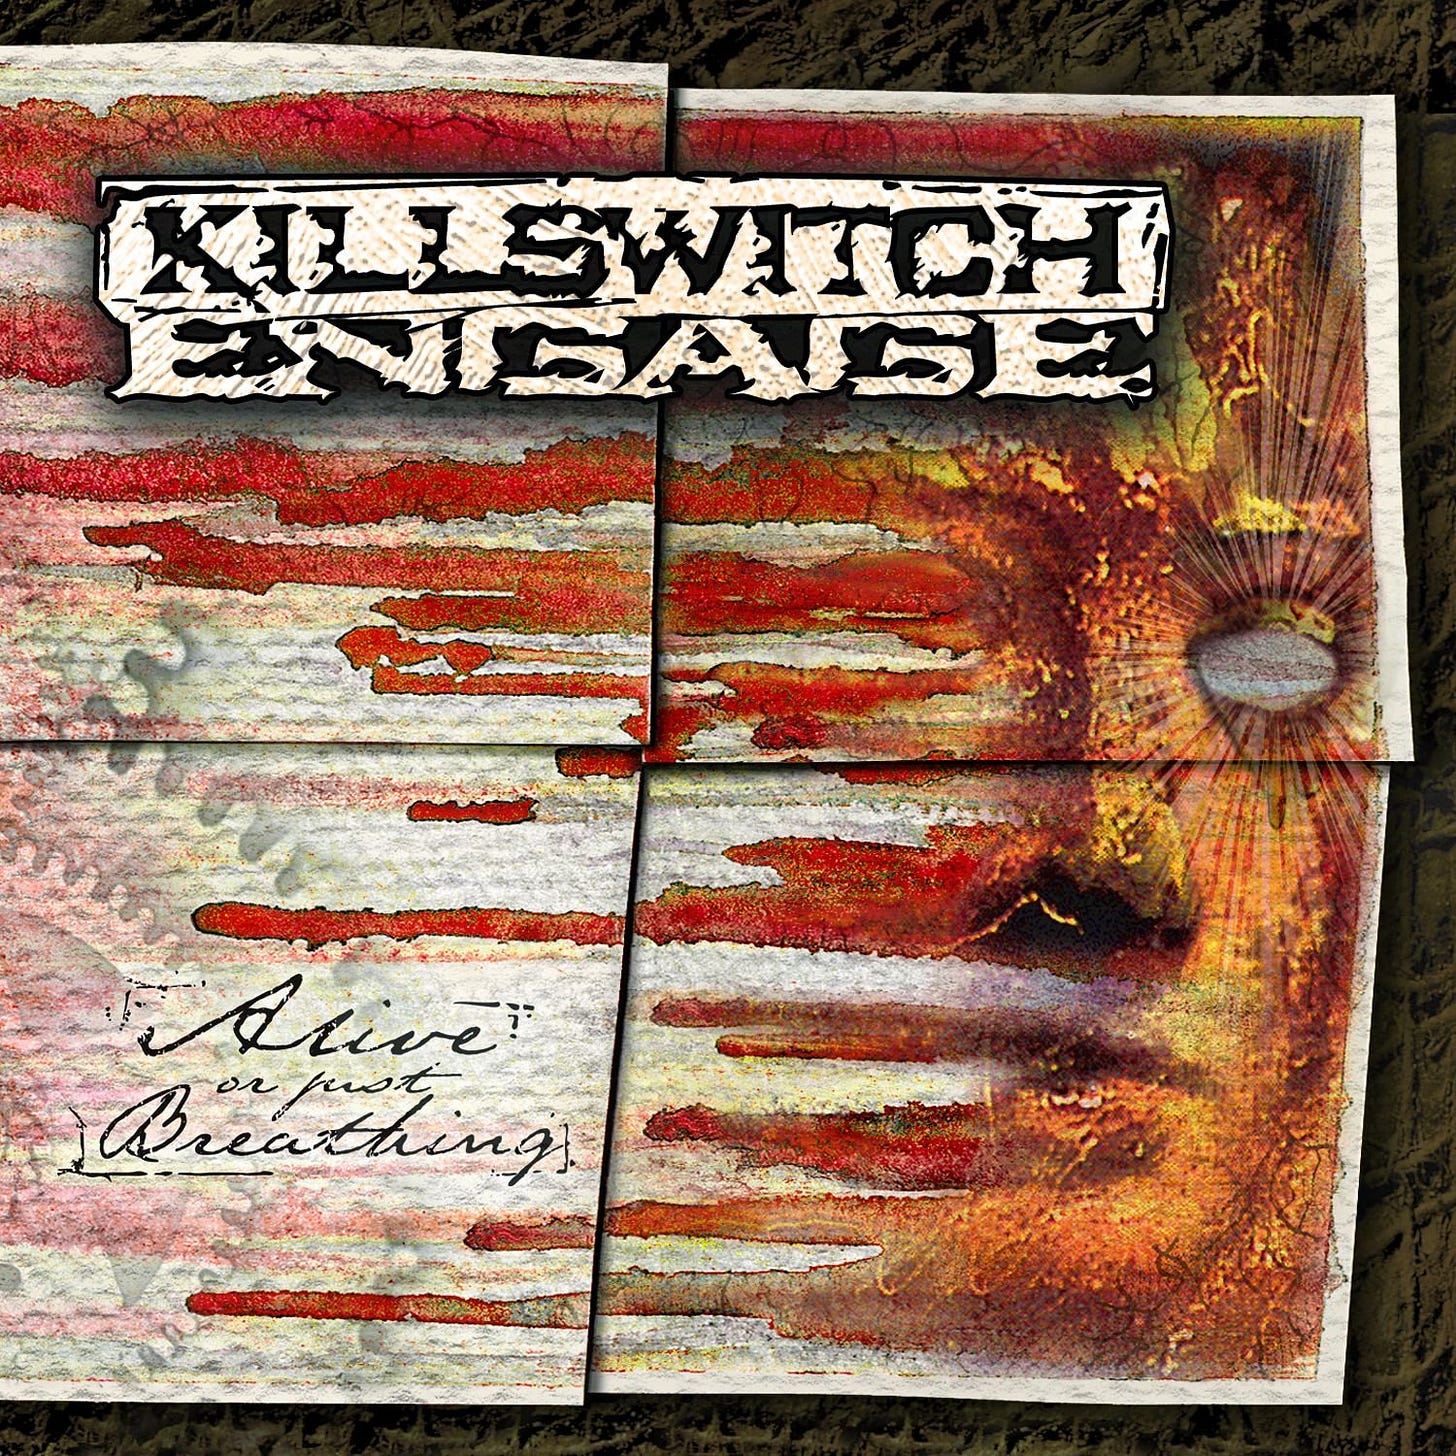 Alive or Just Breathing: Killswitch Engage: Amazon.es: CDs y vinilos}